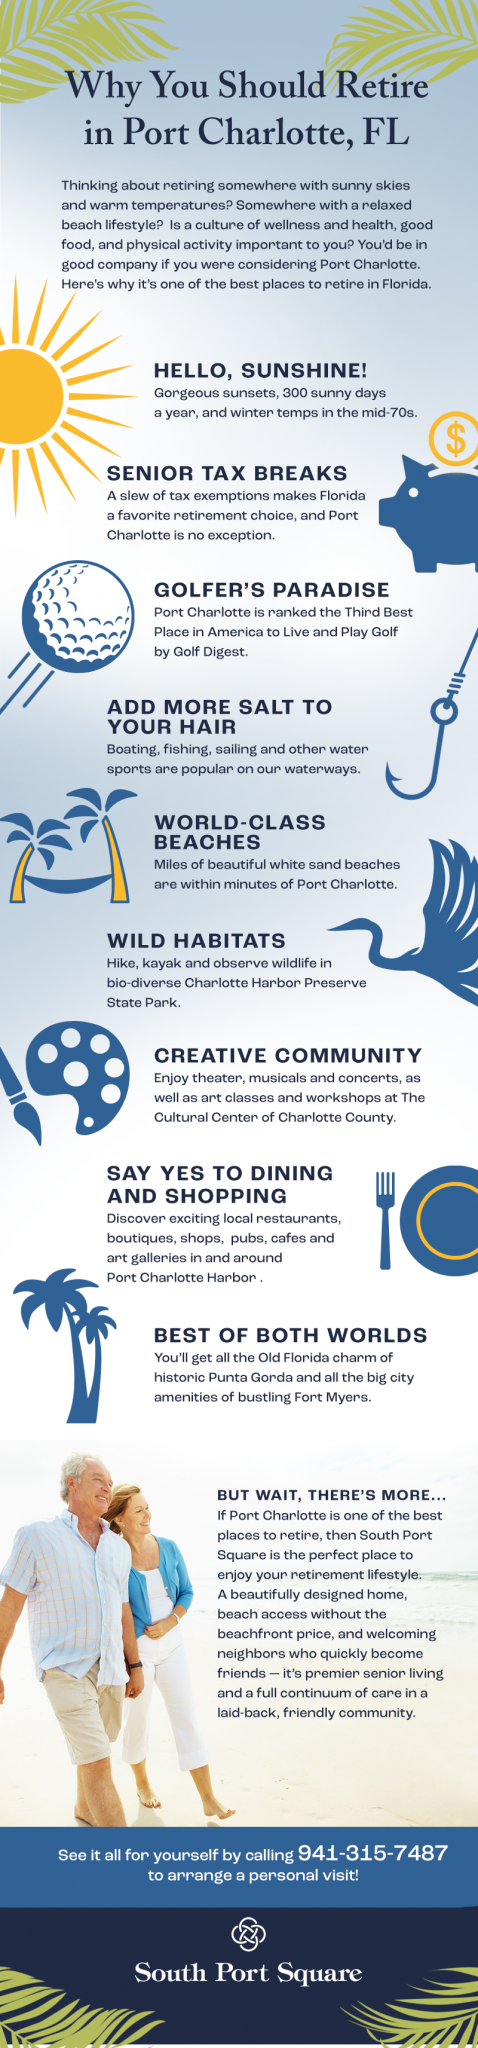 infographic for why you should retire in port charlotte fl